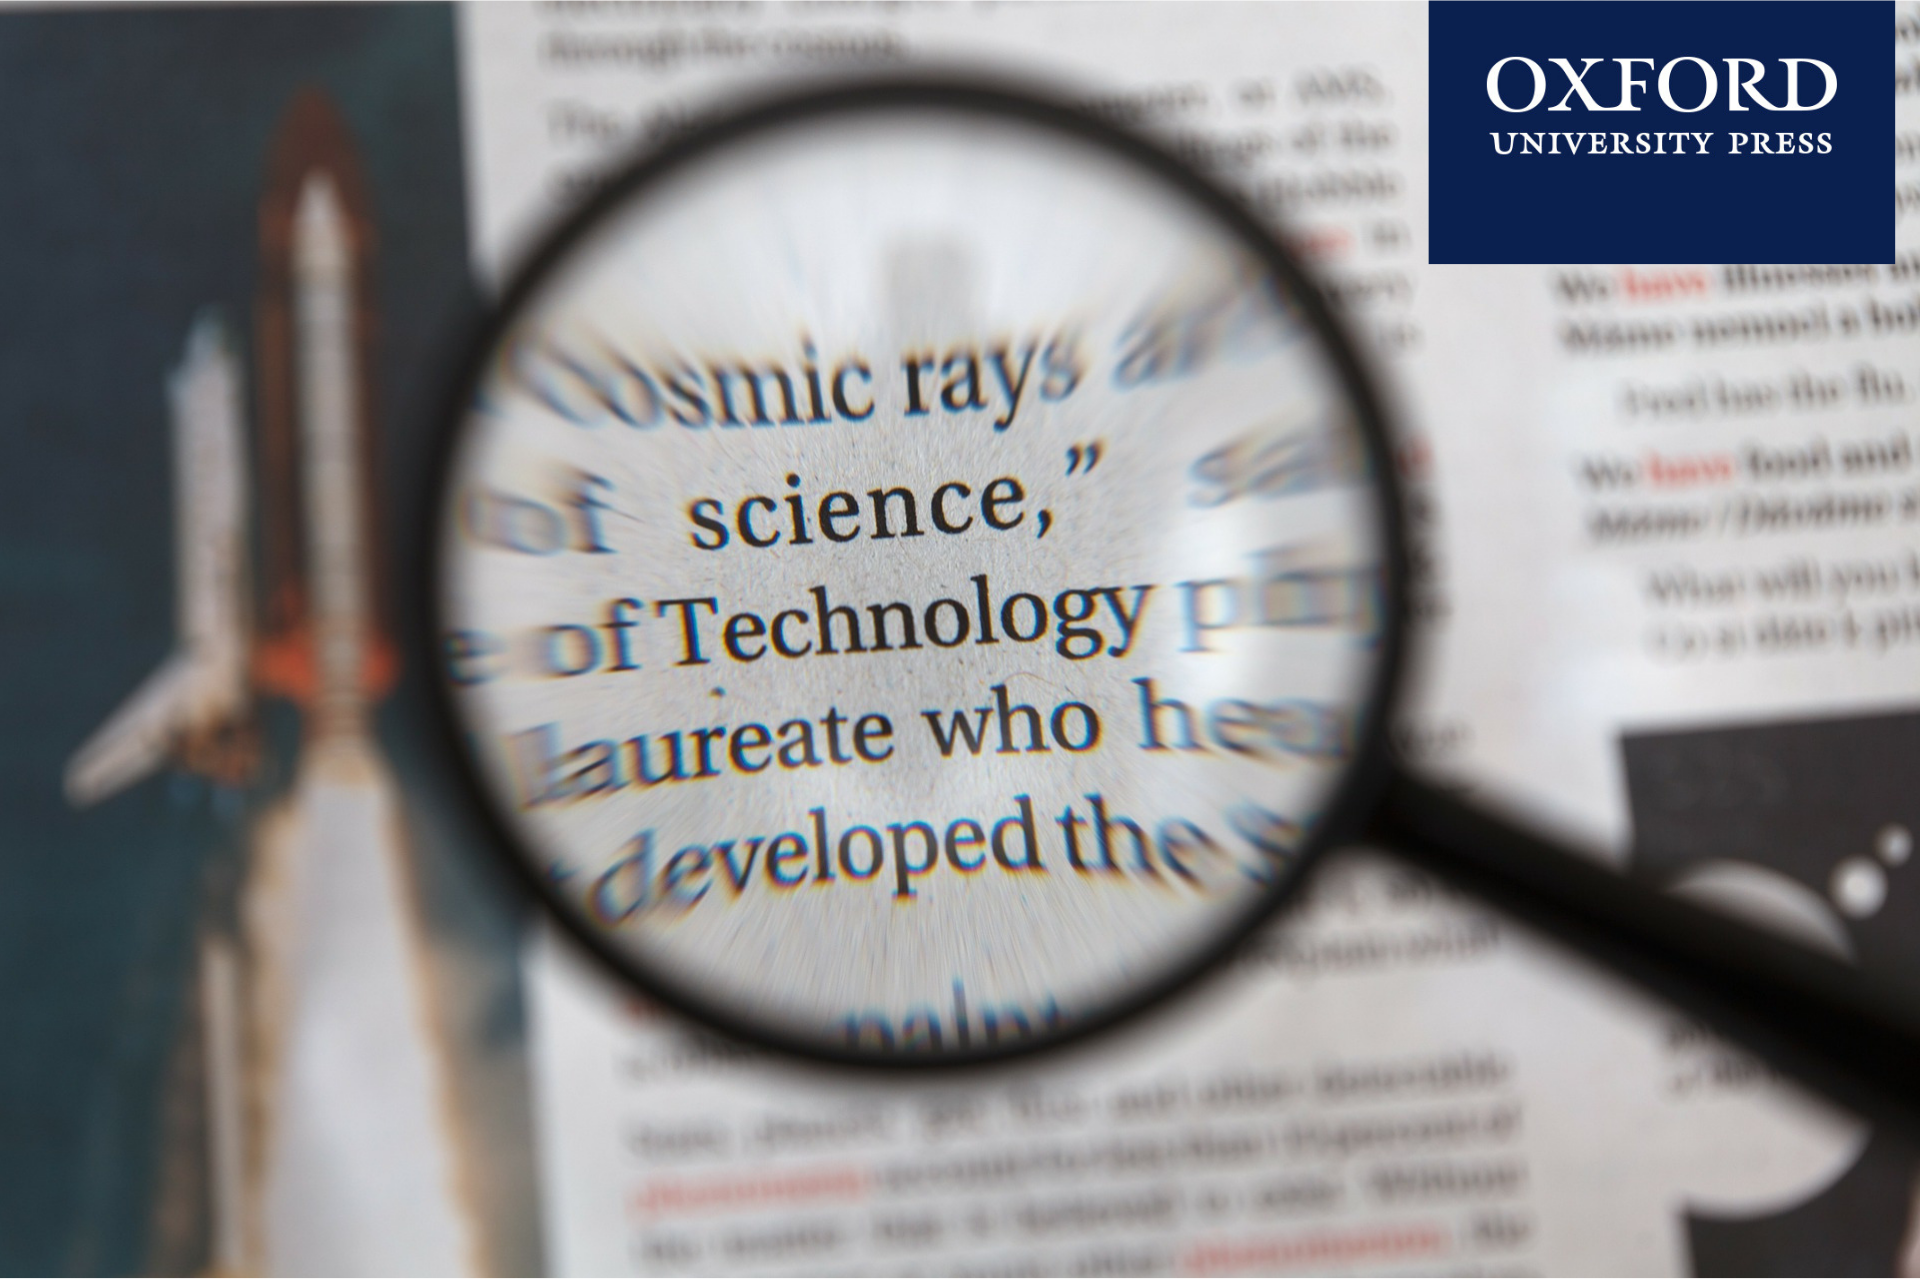 Magnifying glass - highlighting science and technology